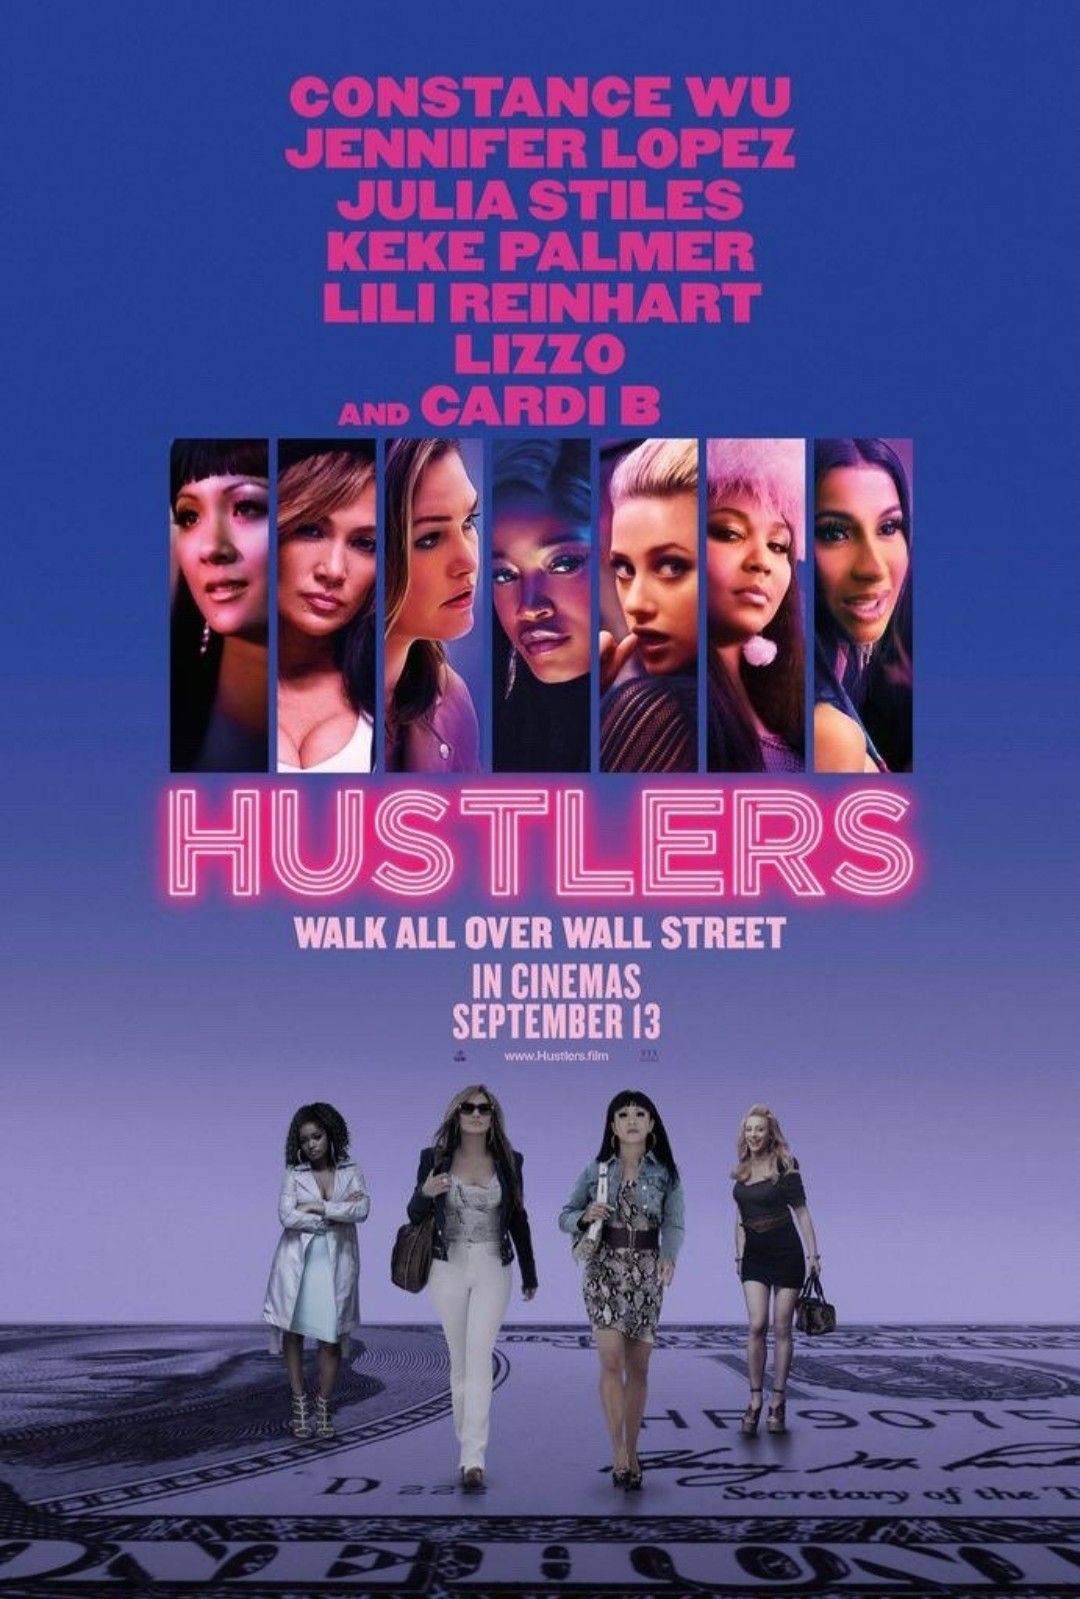 Inspired by the viral New York Magazine article, Hustlers follows a crew of savvy former strip club employees who band together to turn the tables on their Wall Street clients.